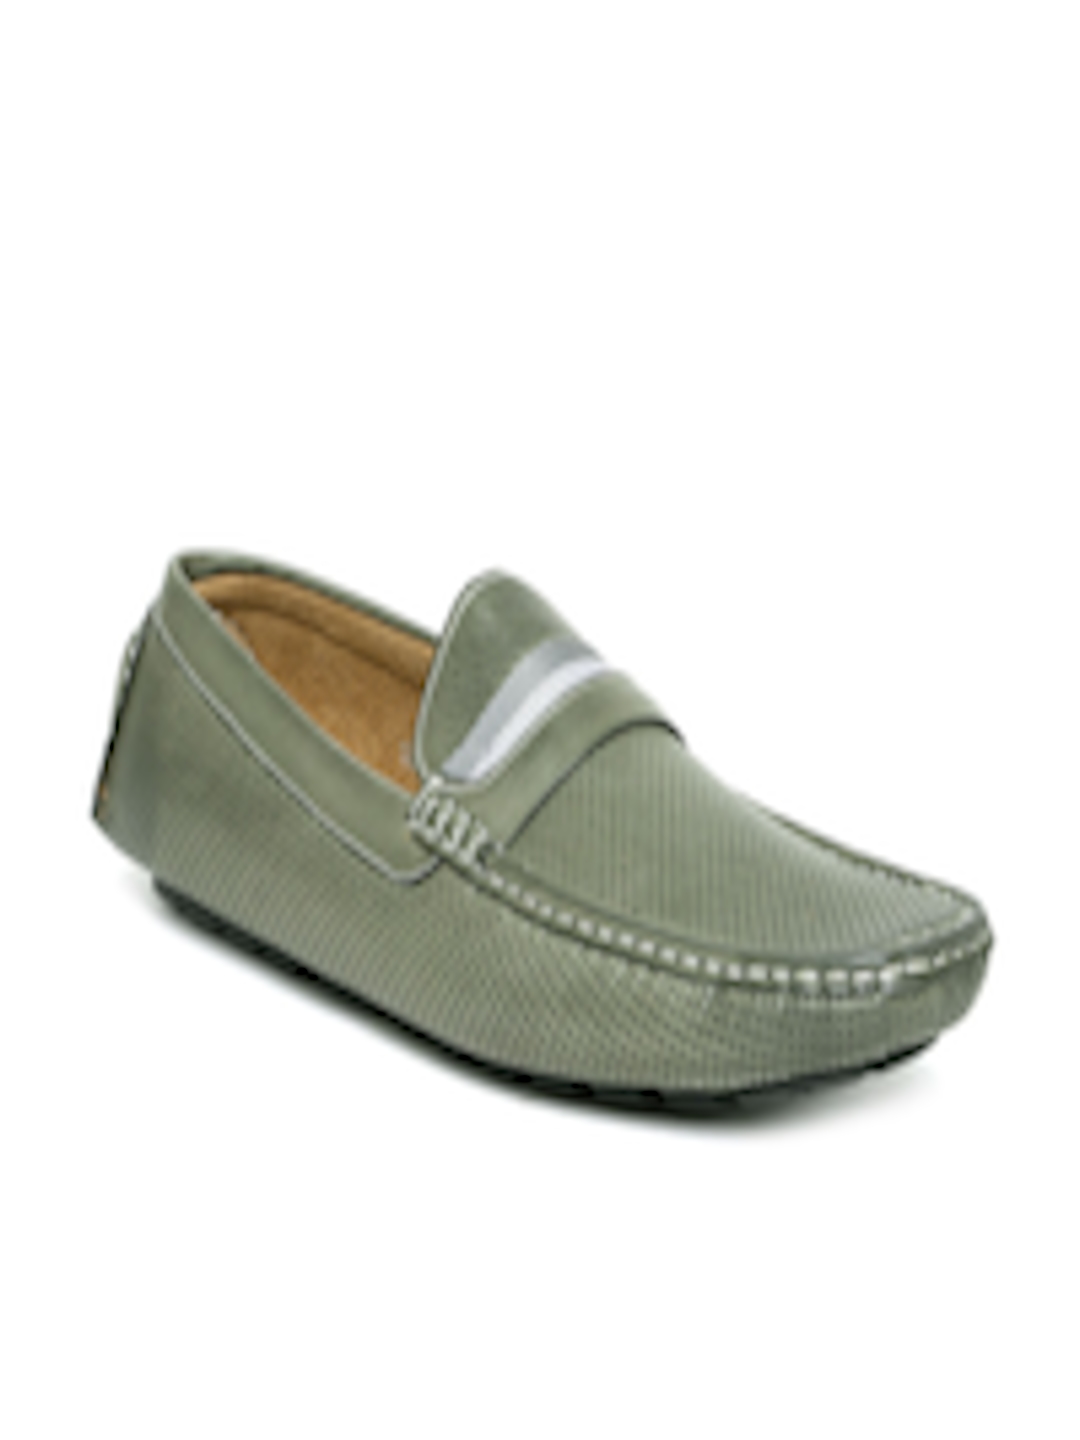 Buy Duke Men Olive Green Loafers - Casual Shoes for Men 1075333 | Myntra